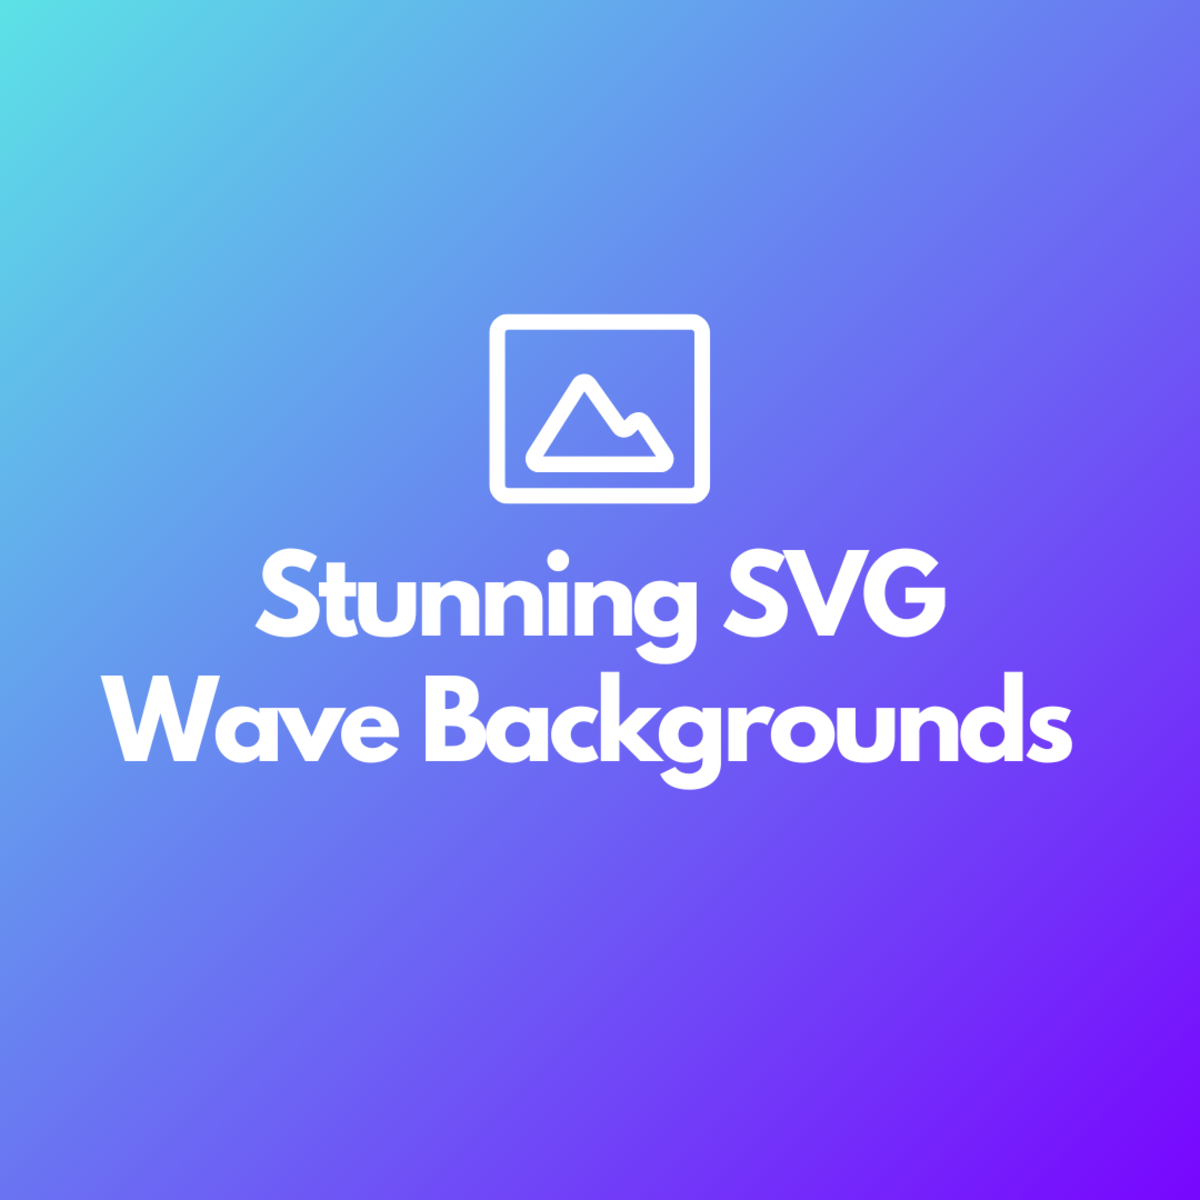 4 Stunning SVG Wave Backgrounds You Can Add to Your Site